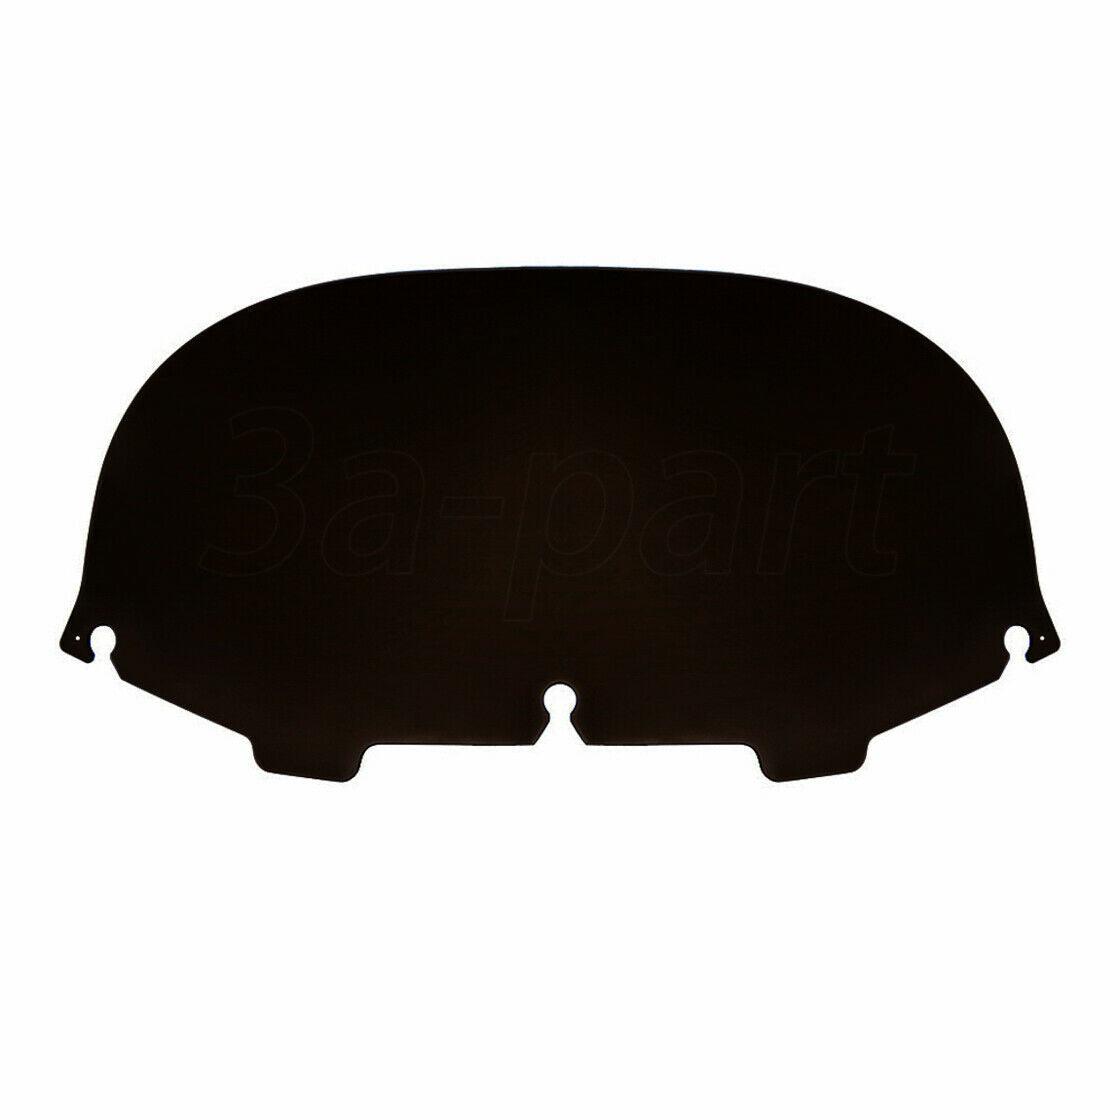 Black 8" Windshield Windscreen Fit For Harley Touring Street Glide FLHX 1996-13 - Moto Life Products